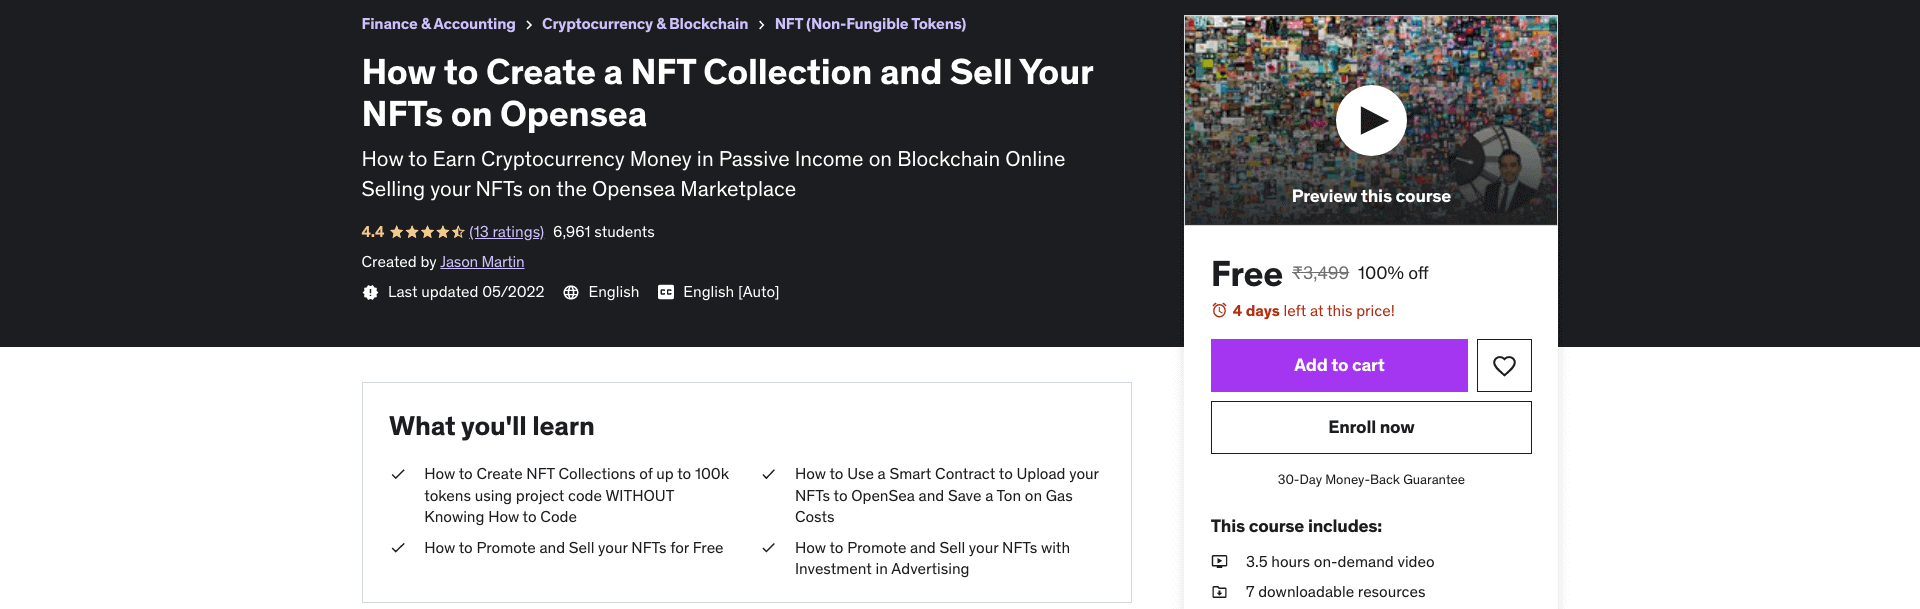 How to Create a NFT Collection and Sell Your NFTs on Opensea